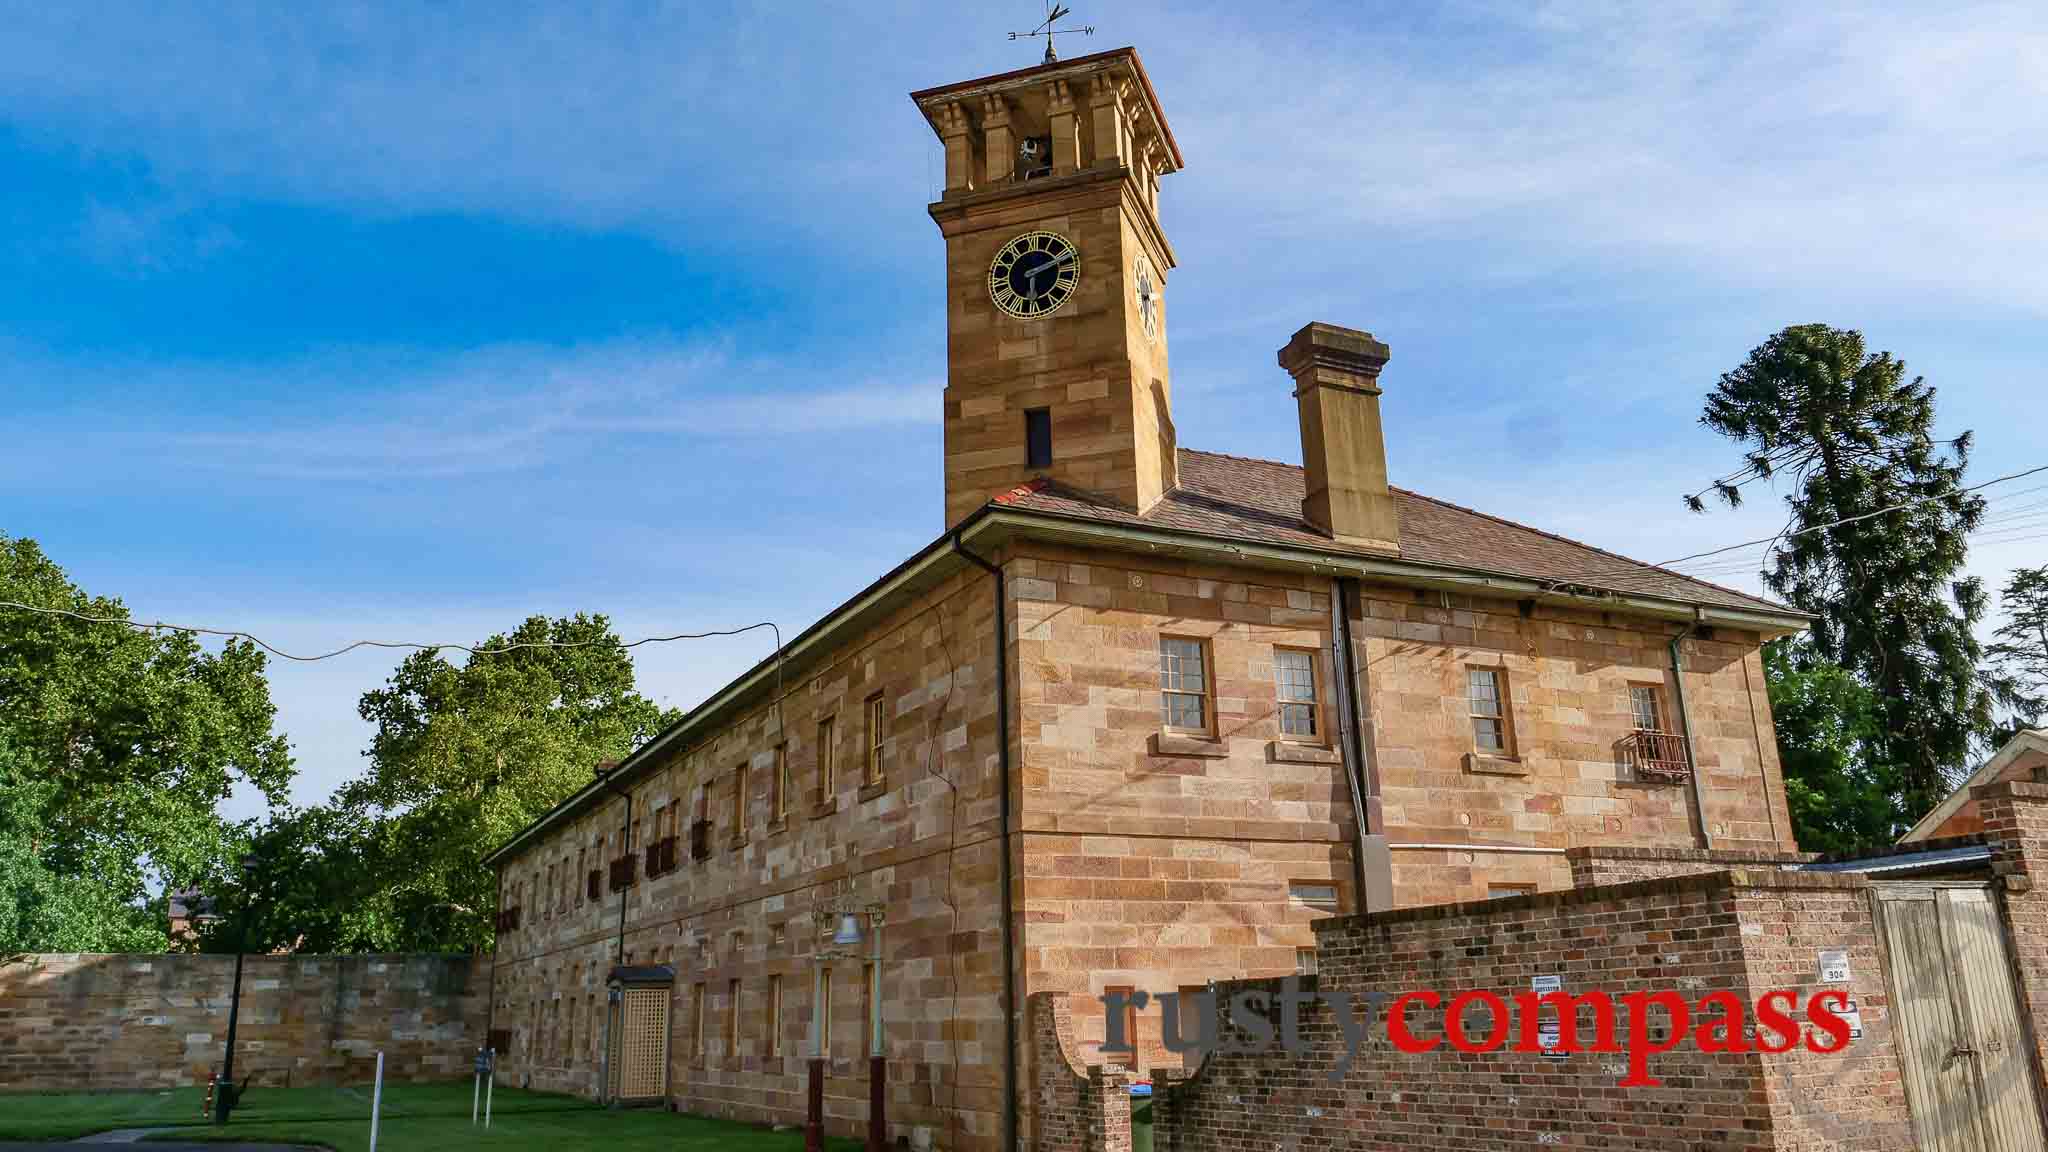 Female Factory Parramatta - Australia's oldest and largest female convict ruins - perfect heritage and cultural development